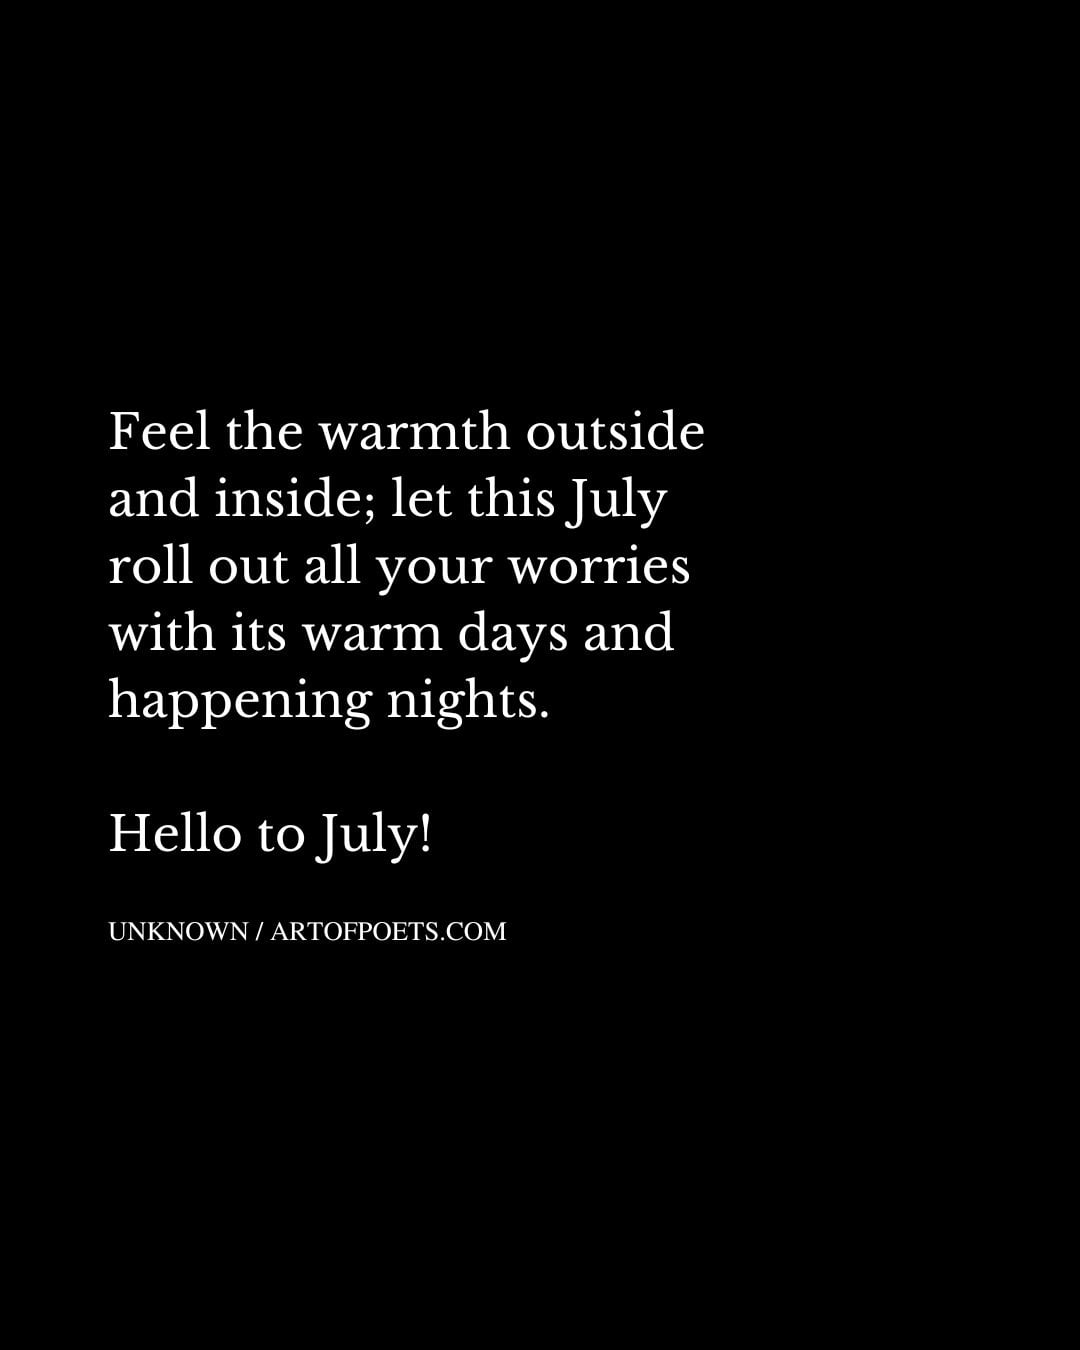 Feel the warmth outside and inside let this July roll out all your worries with its warm days and happening nights. Hello to July